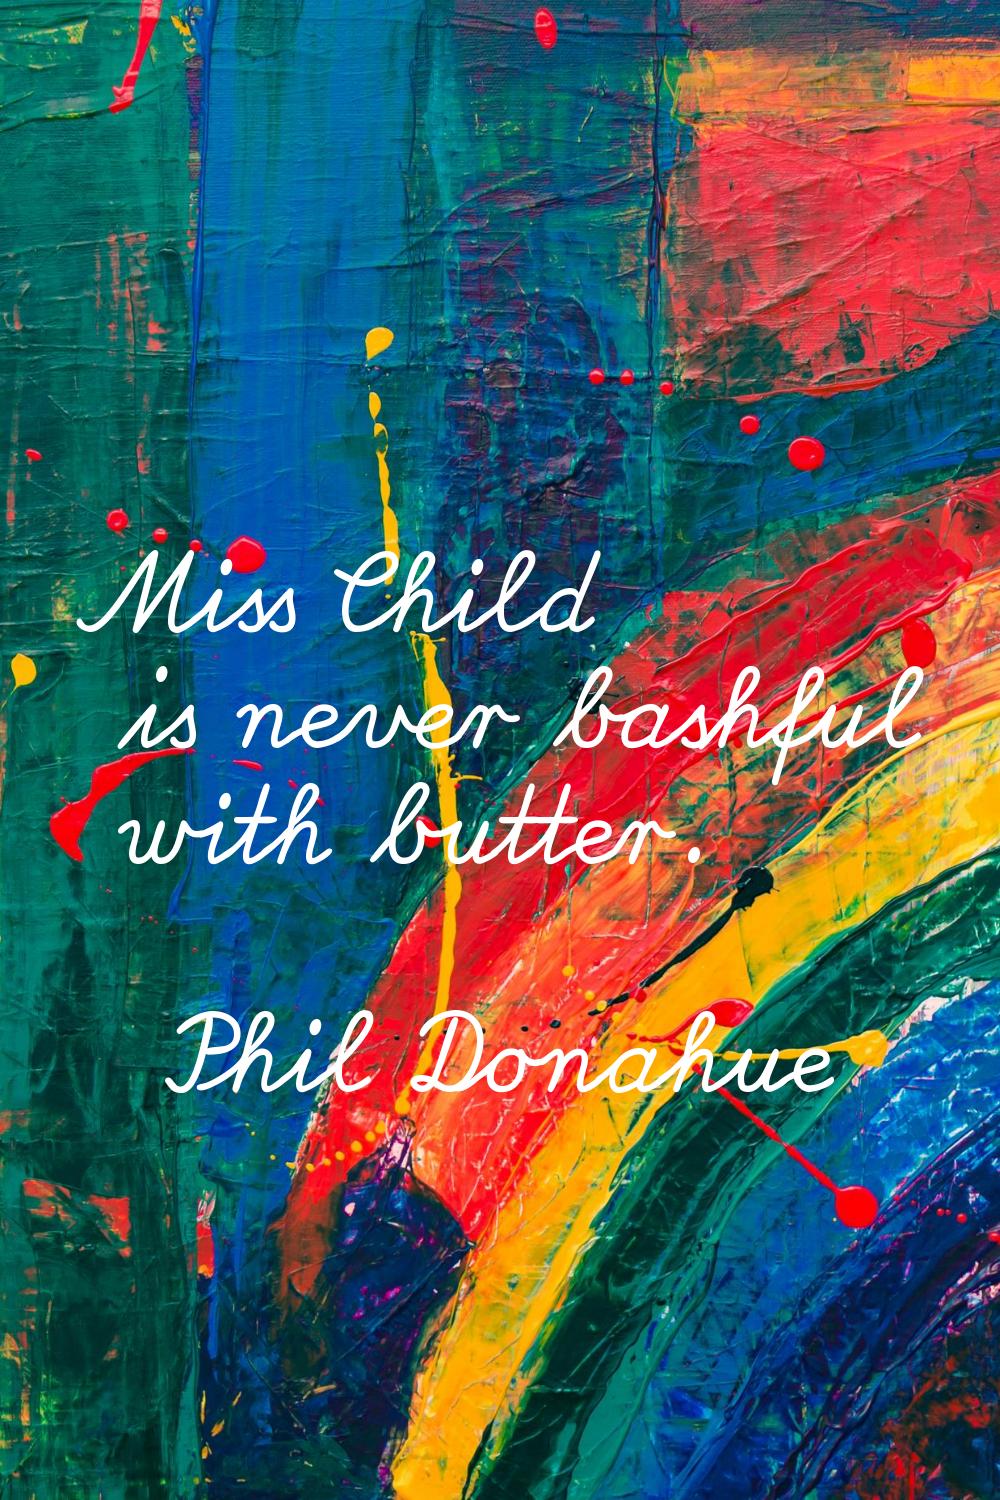 Miss Child is never bashful with butter.